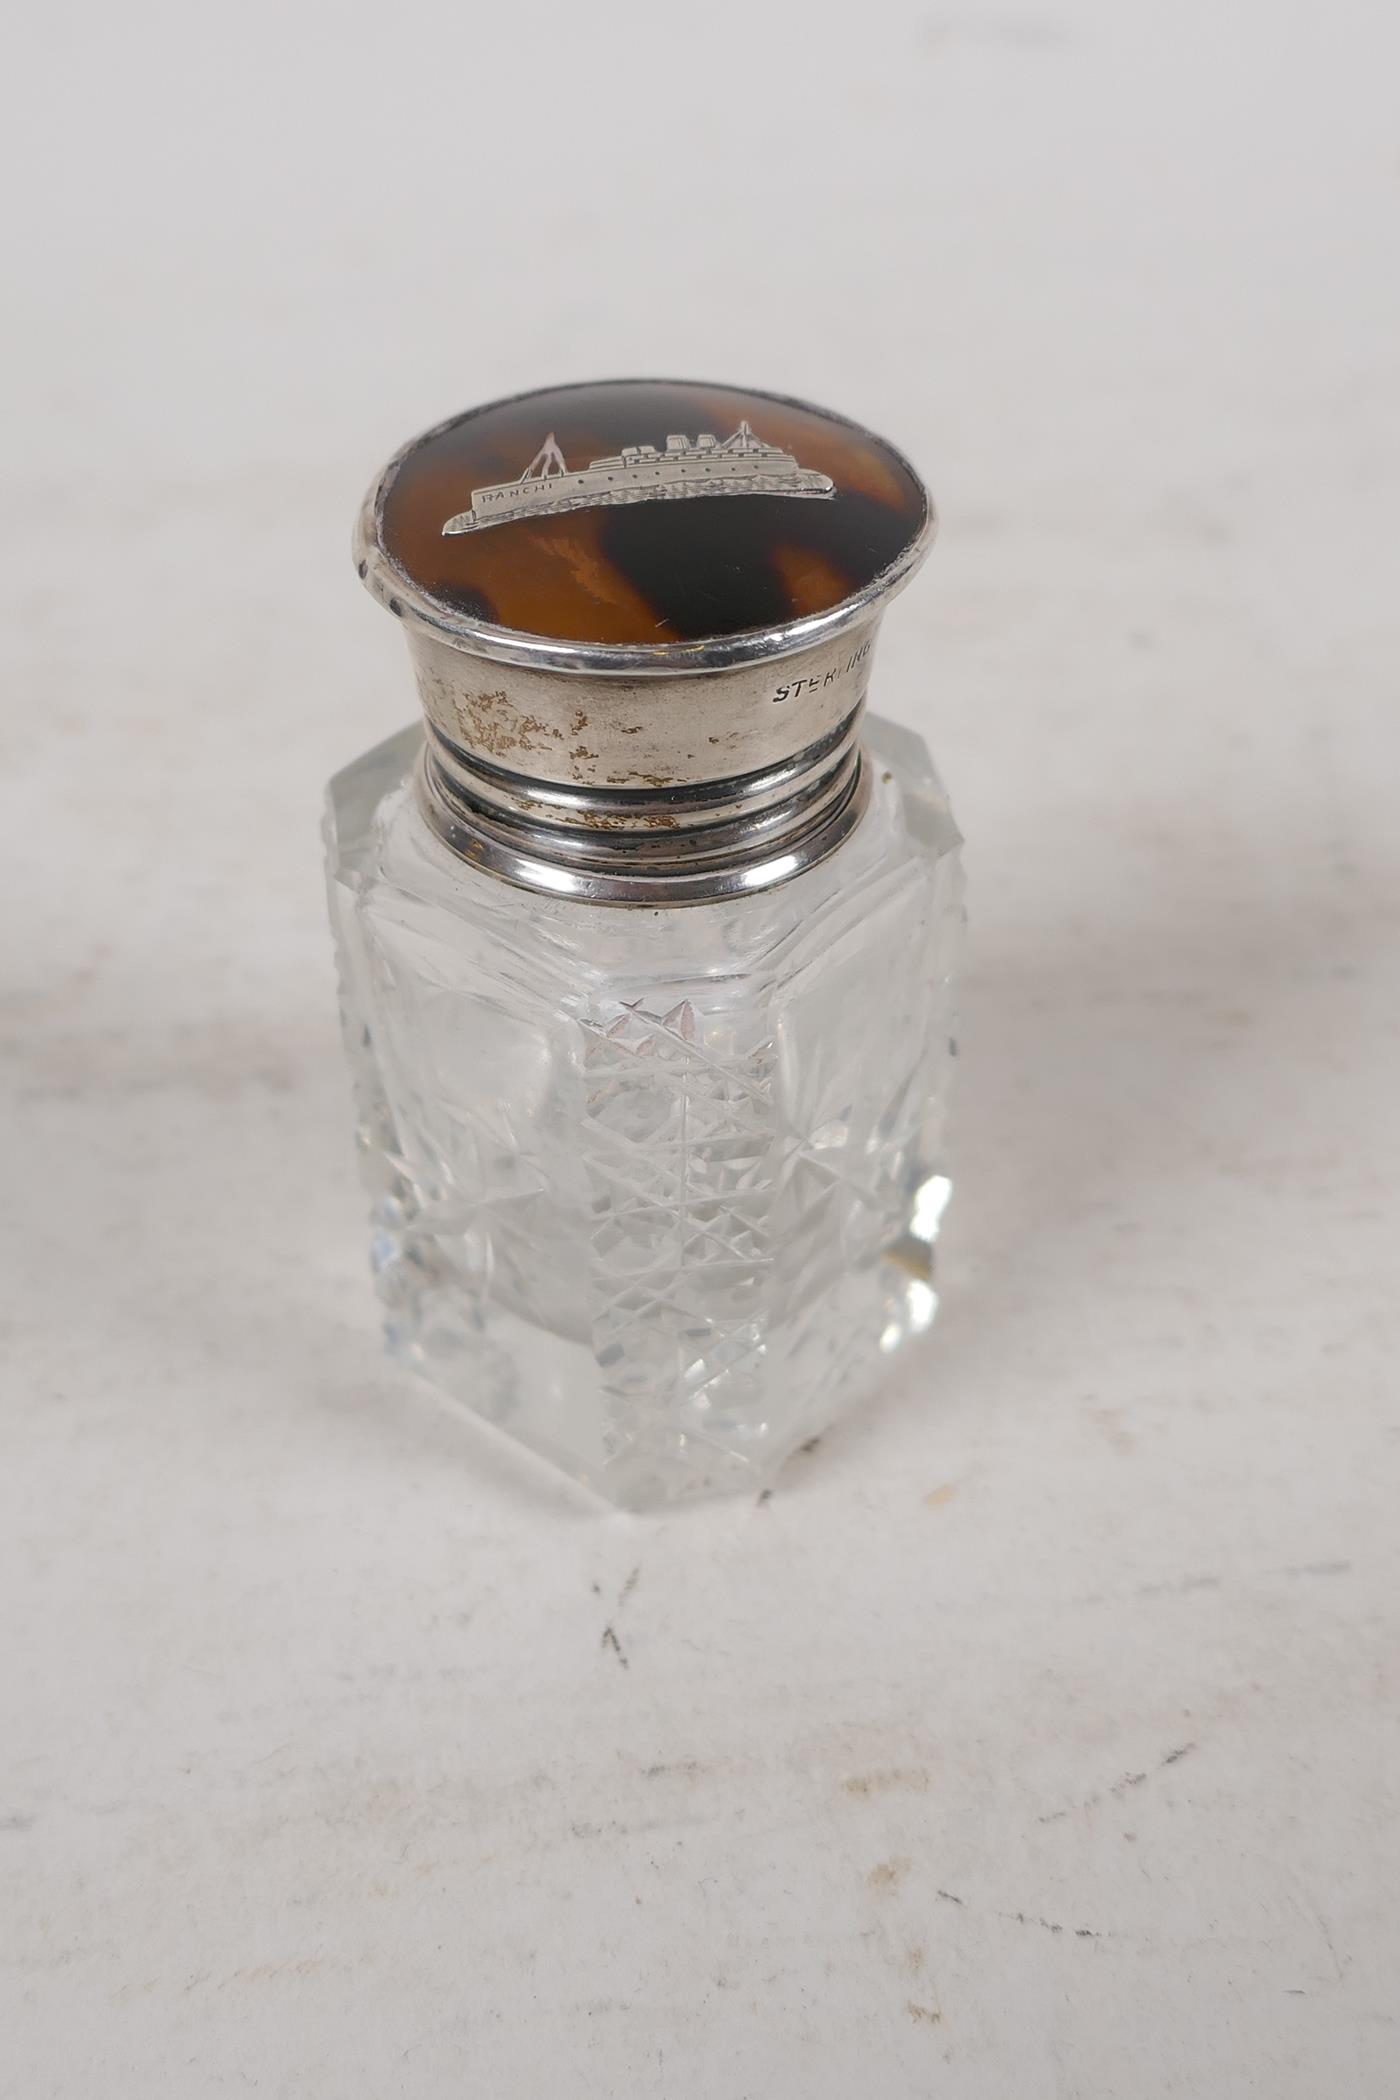 A cut glass scent bottle with a sterling silver and tortoiseshell cup, the lid with inset silver - Image 2 of 5